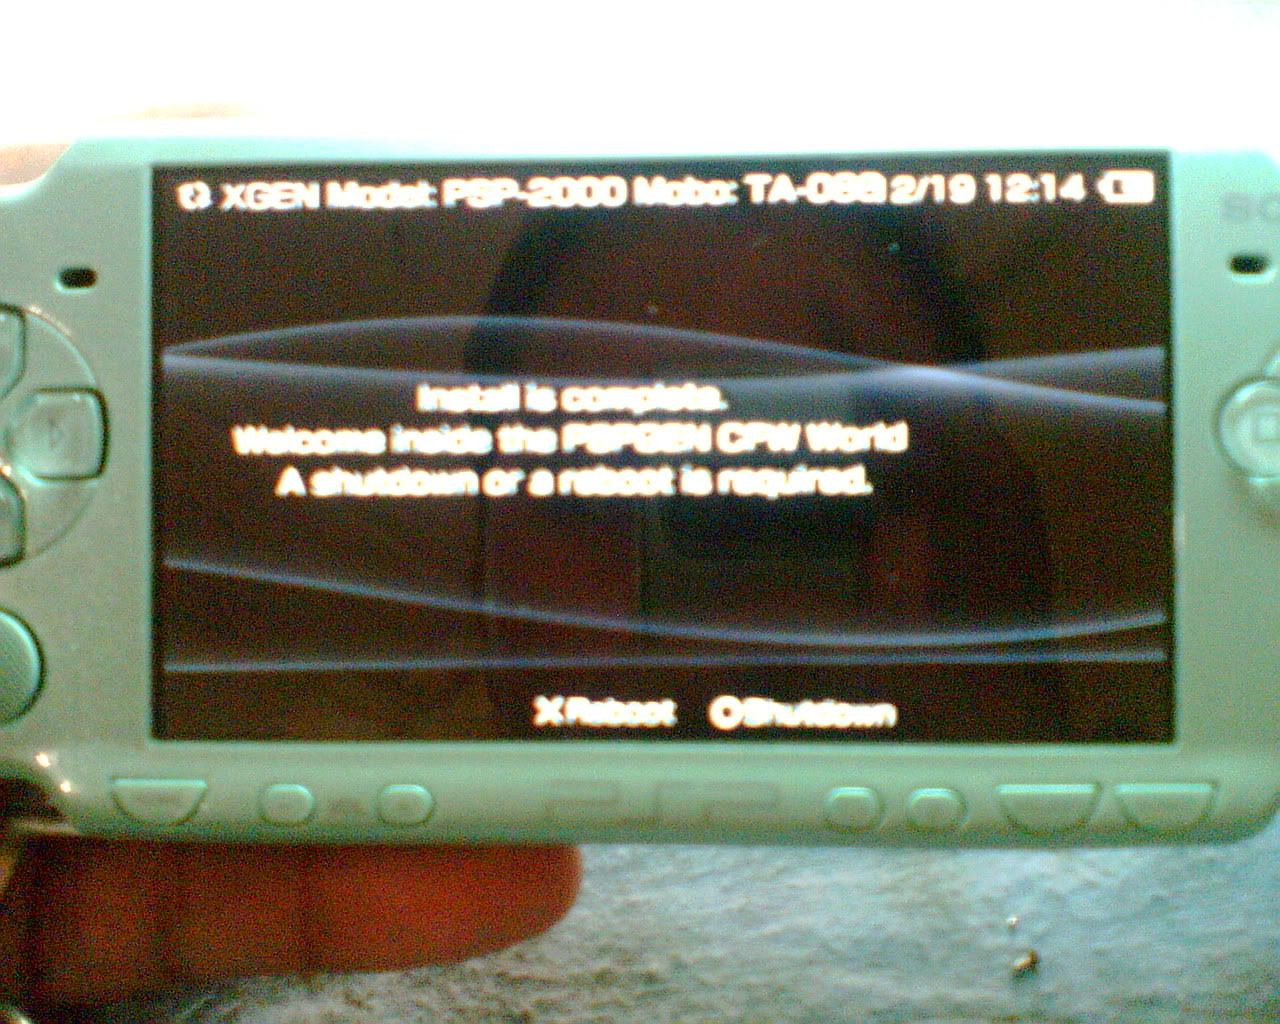 Thumbs up Procedure On how to Update your Hackable PSP[Slim/Fhat] to 5.50 GEN D-2 w/out pandora Image015